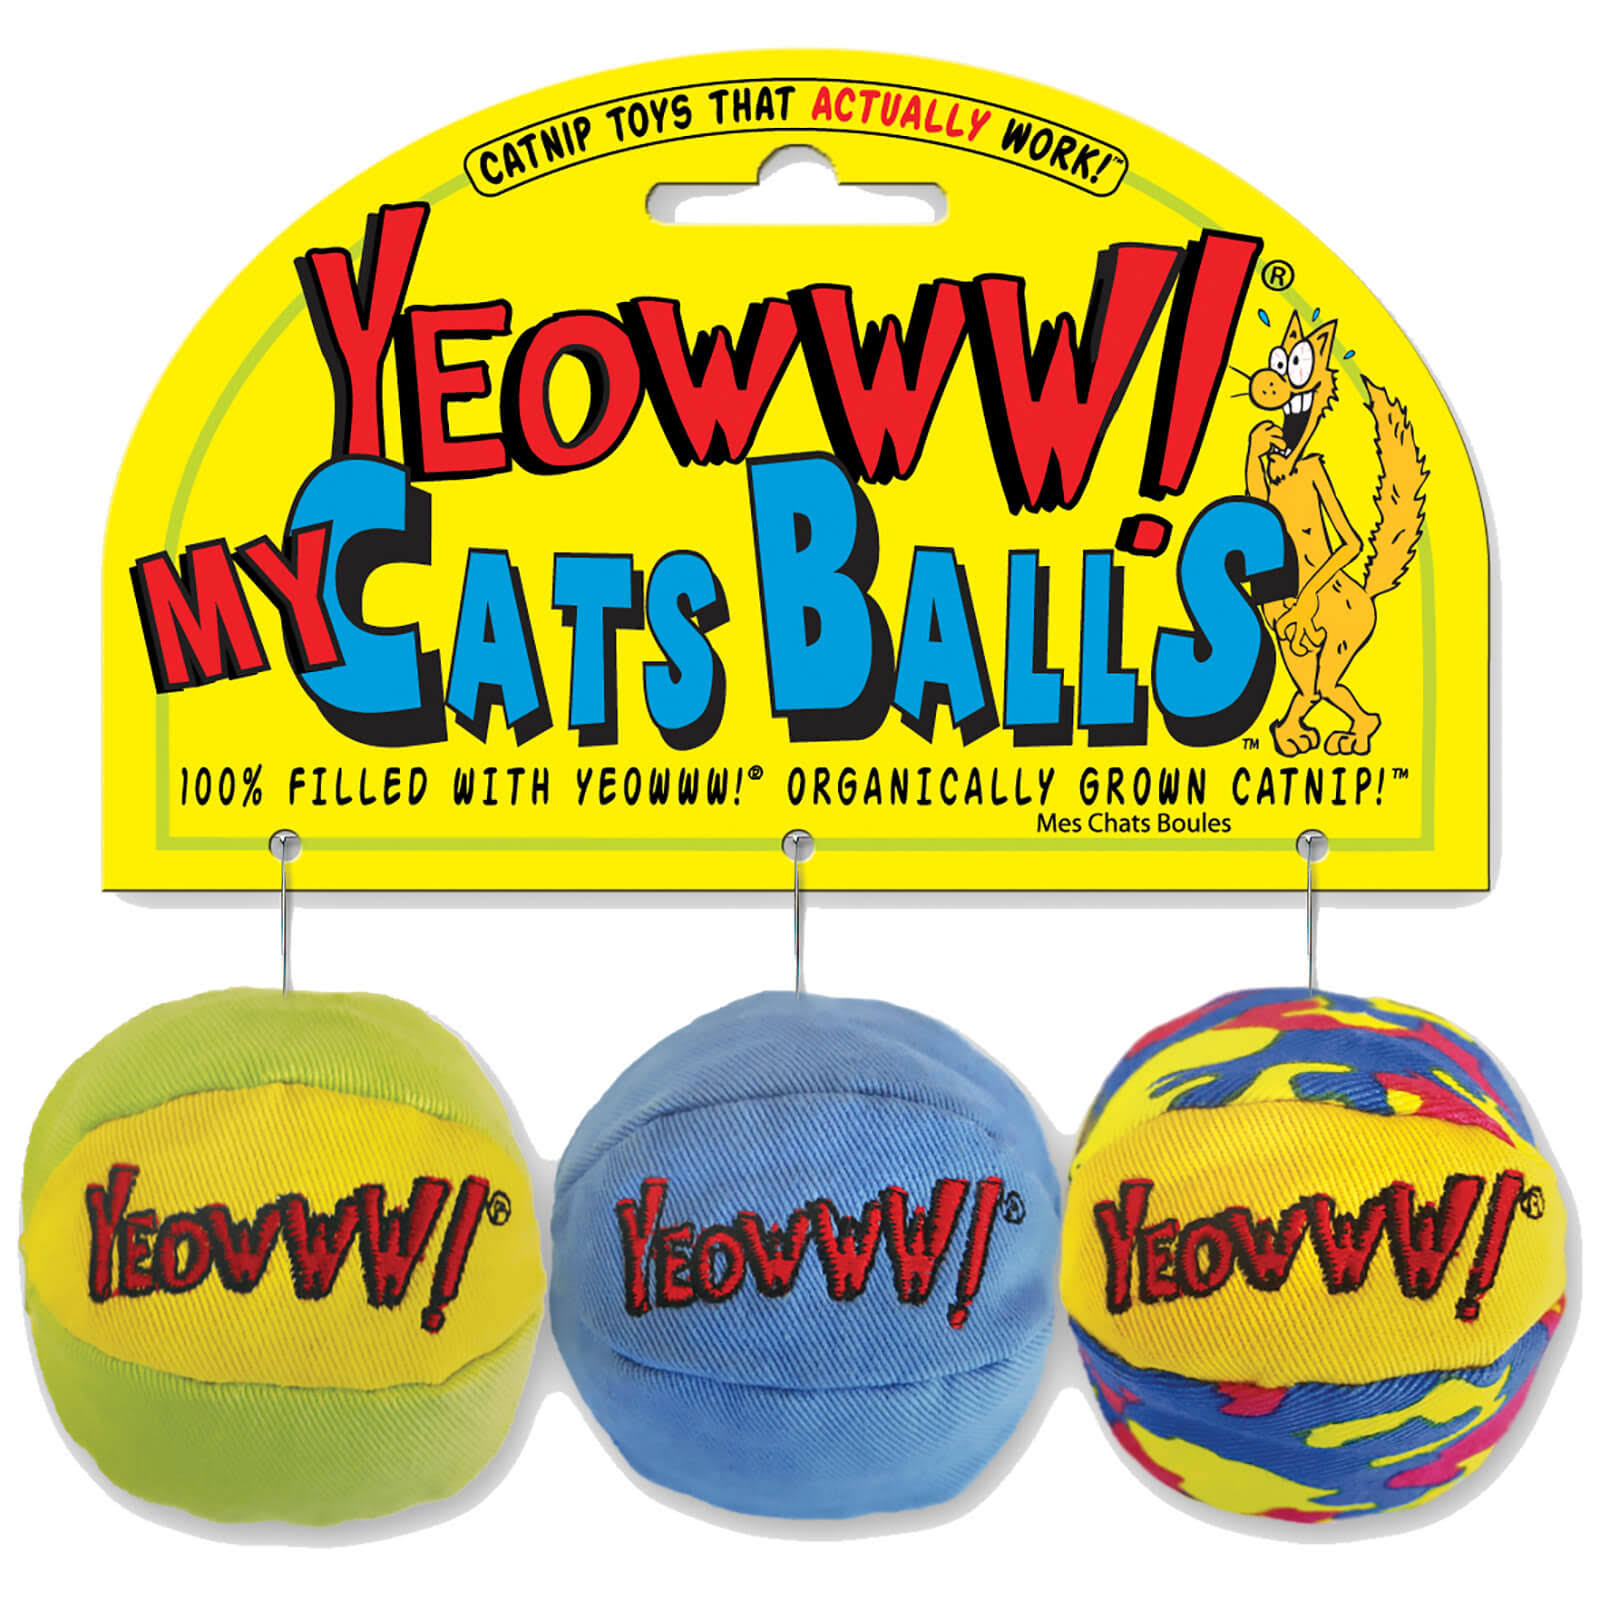 Yeowww My Cats Balls Cat Toy - 3 Pack